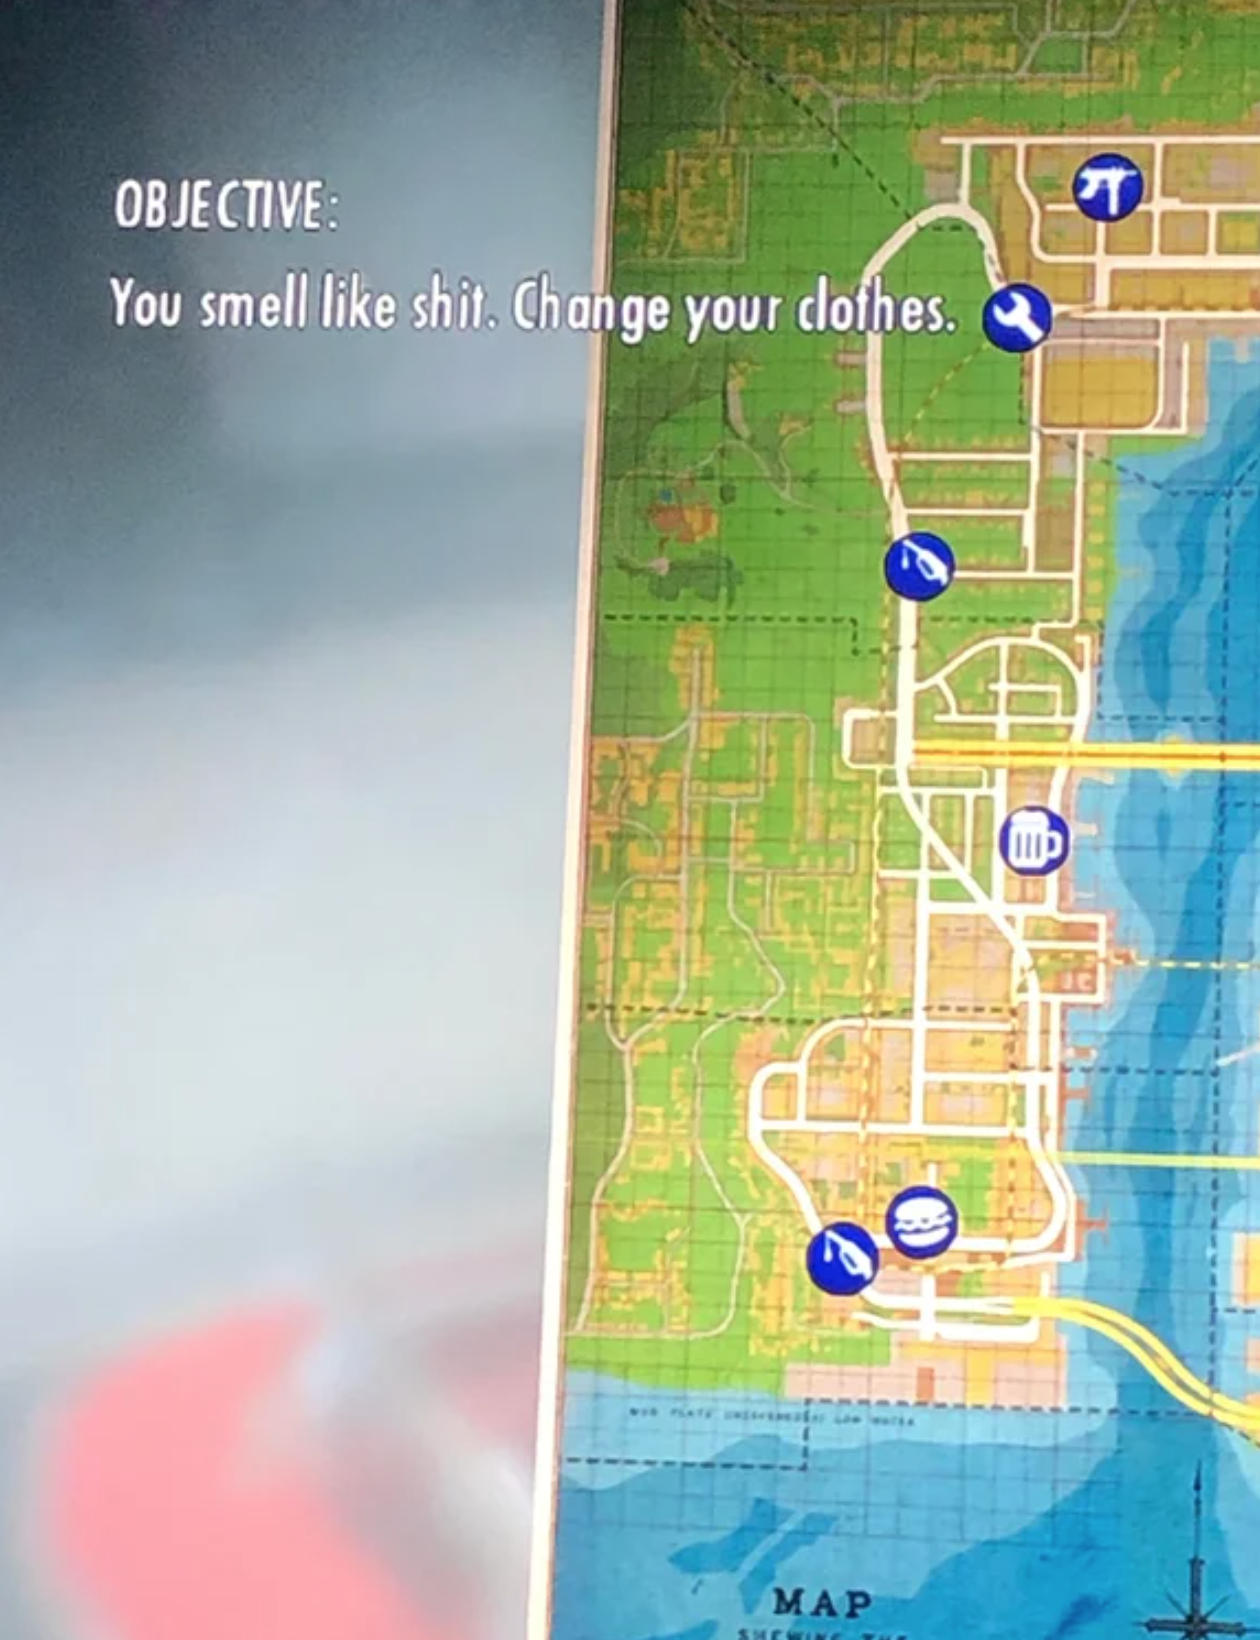 funny gaming memes - mafia 2 map - Objective You smell shit Change your clothes Map